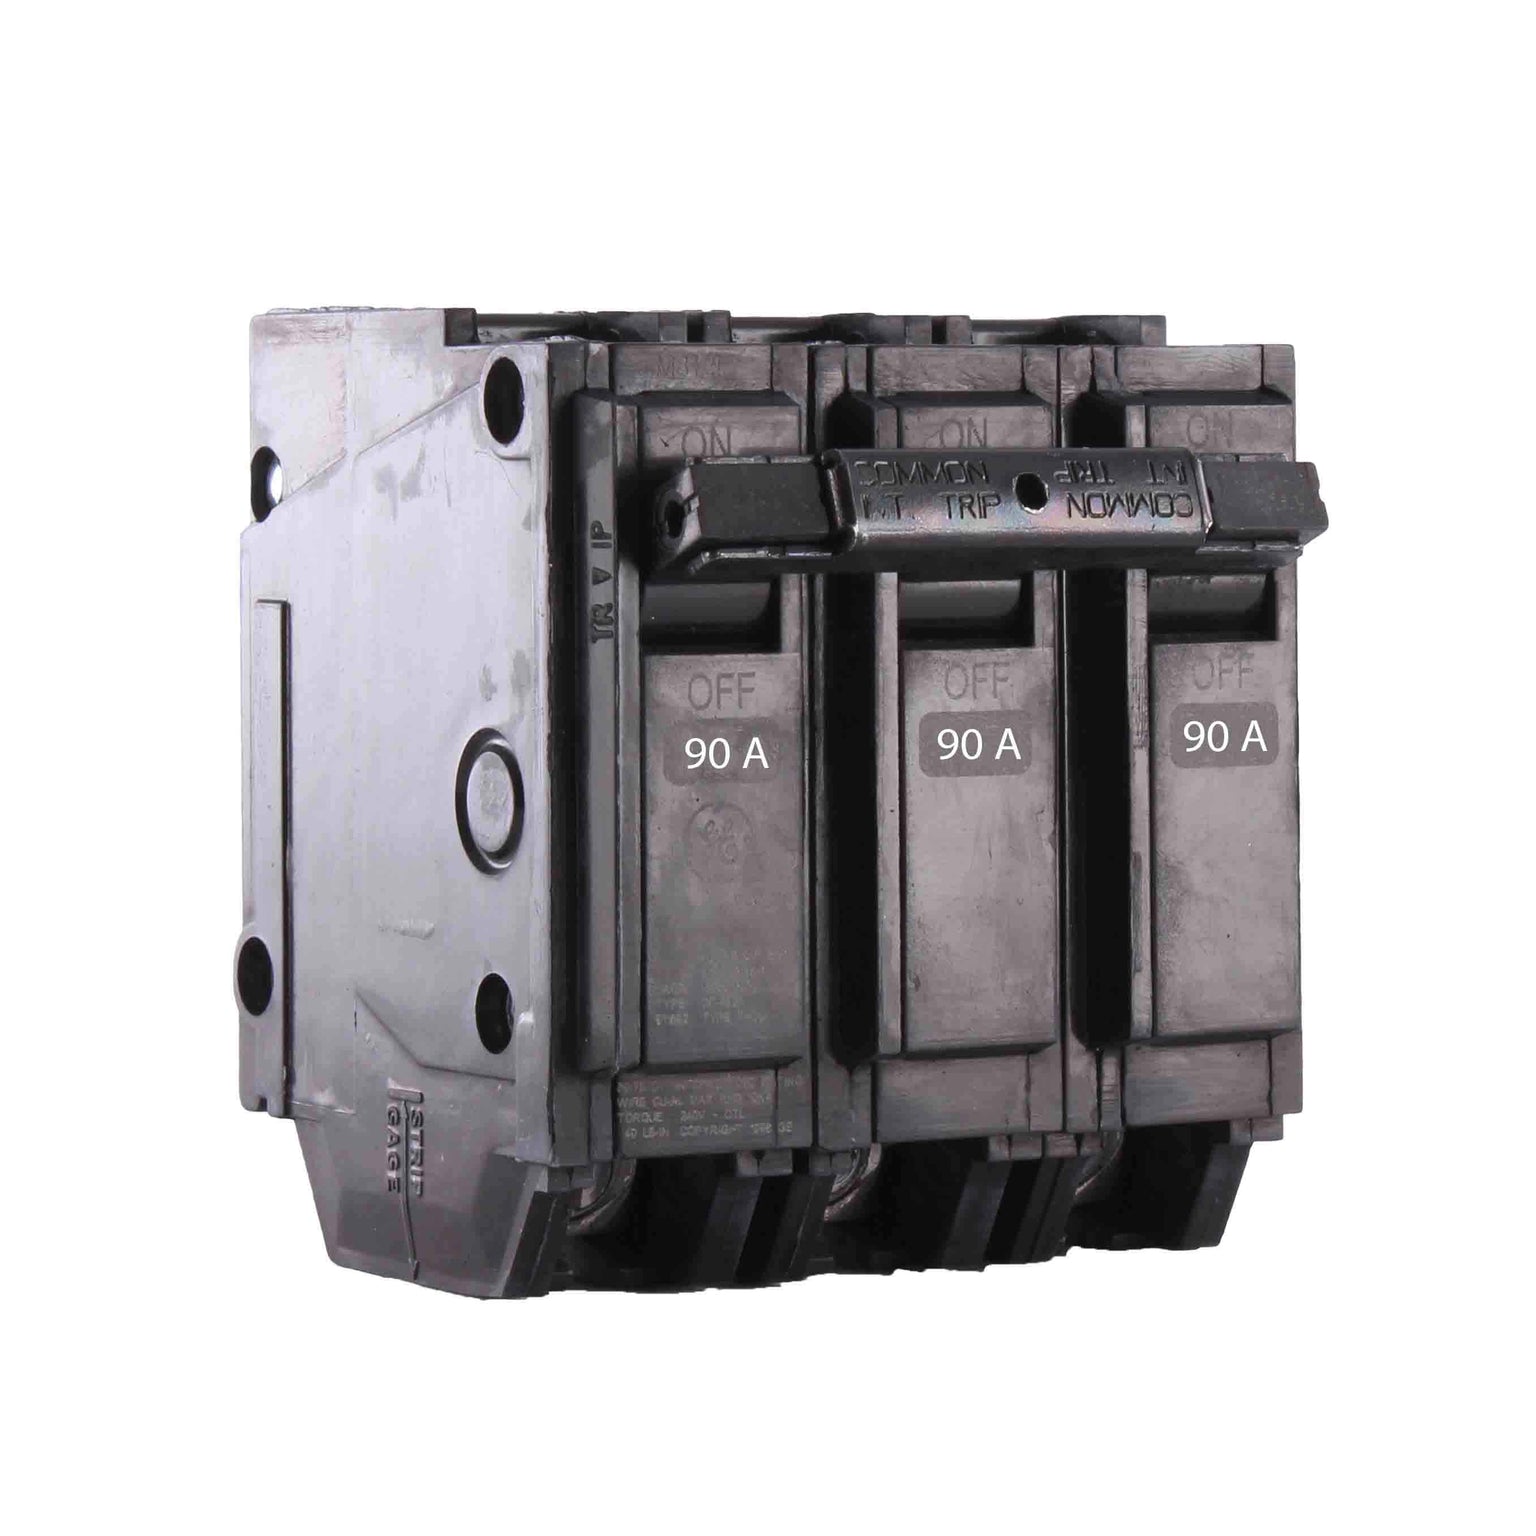 THQL32090ST1 - General Electrics - Molded Case Circuit Breakers